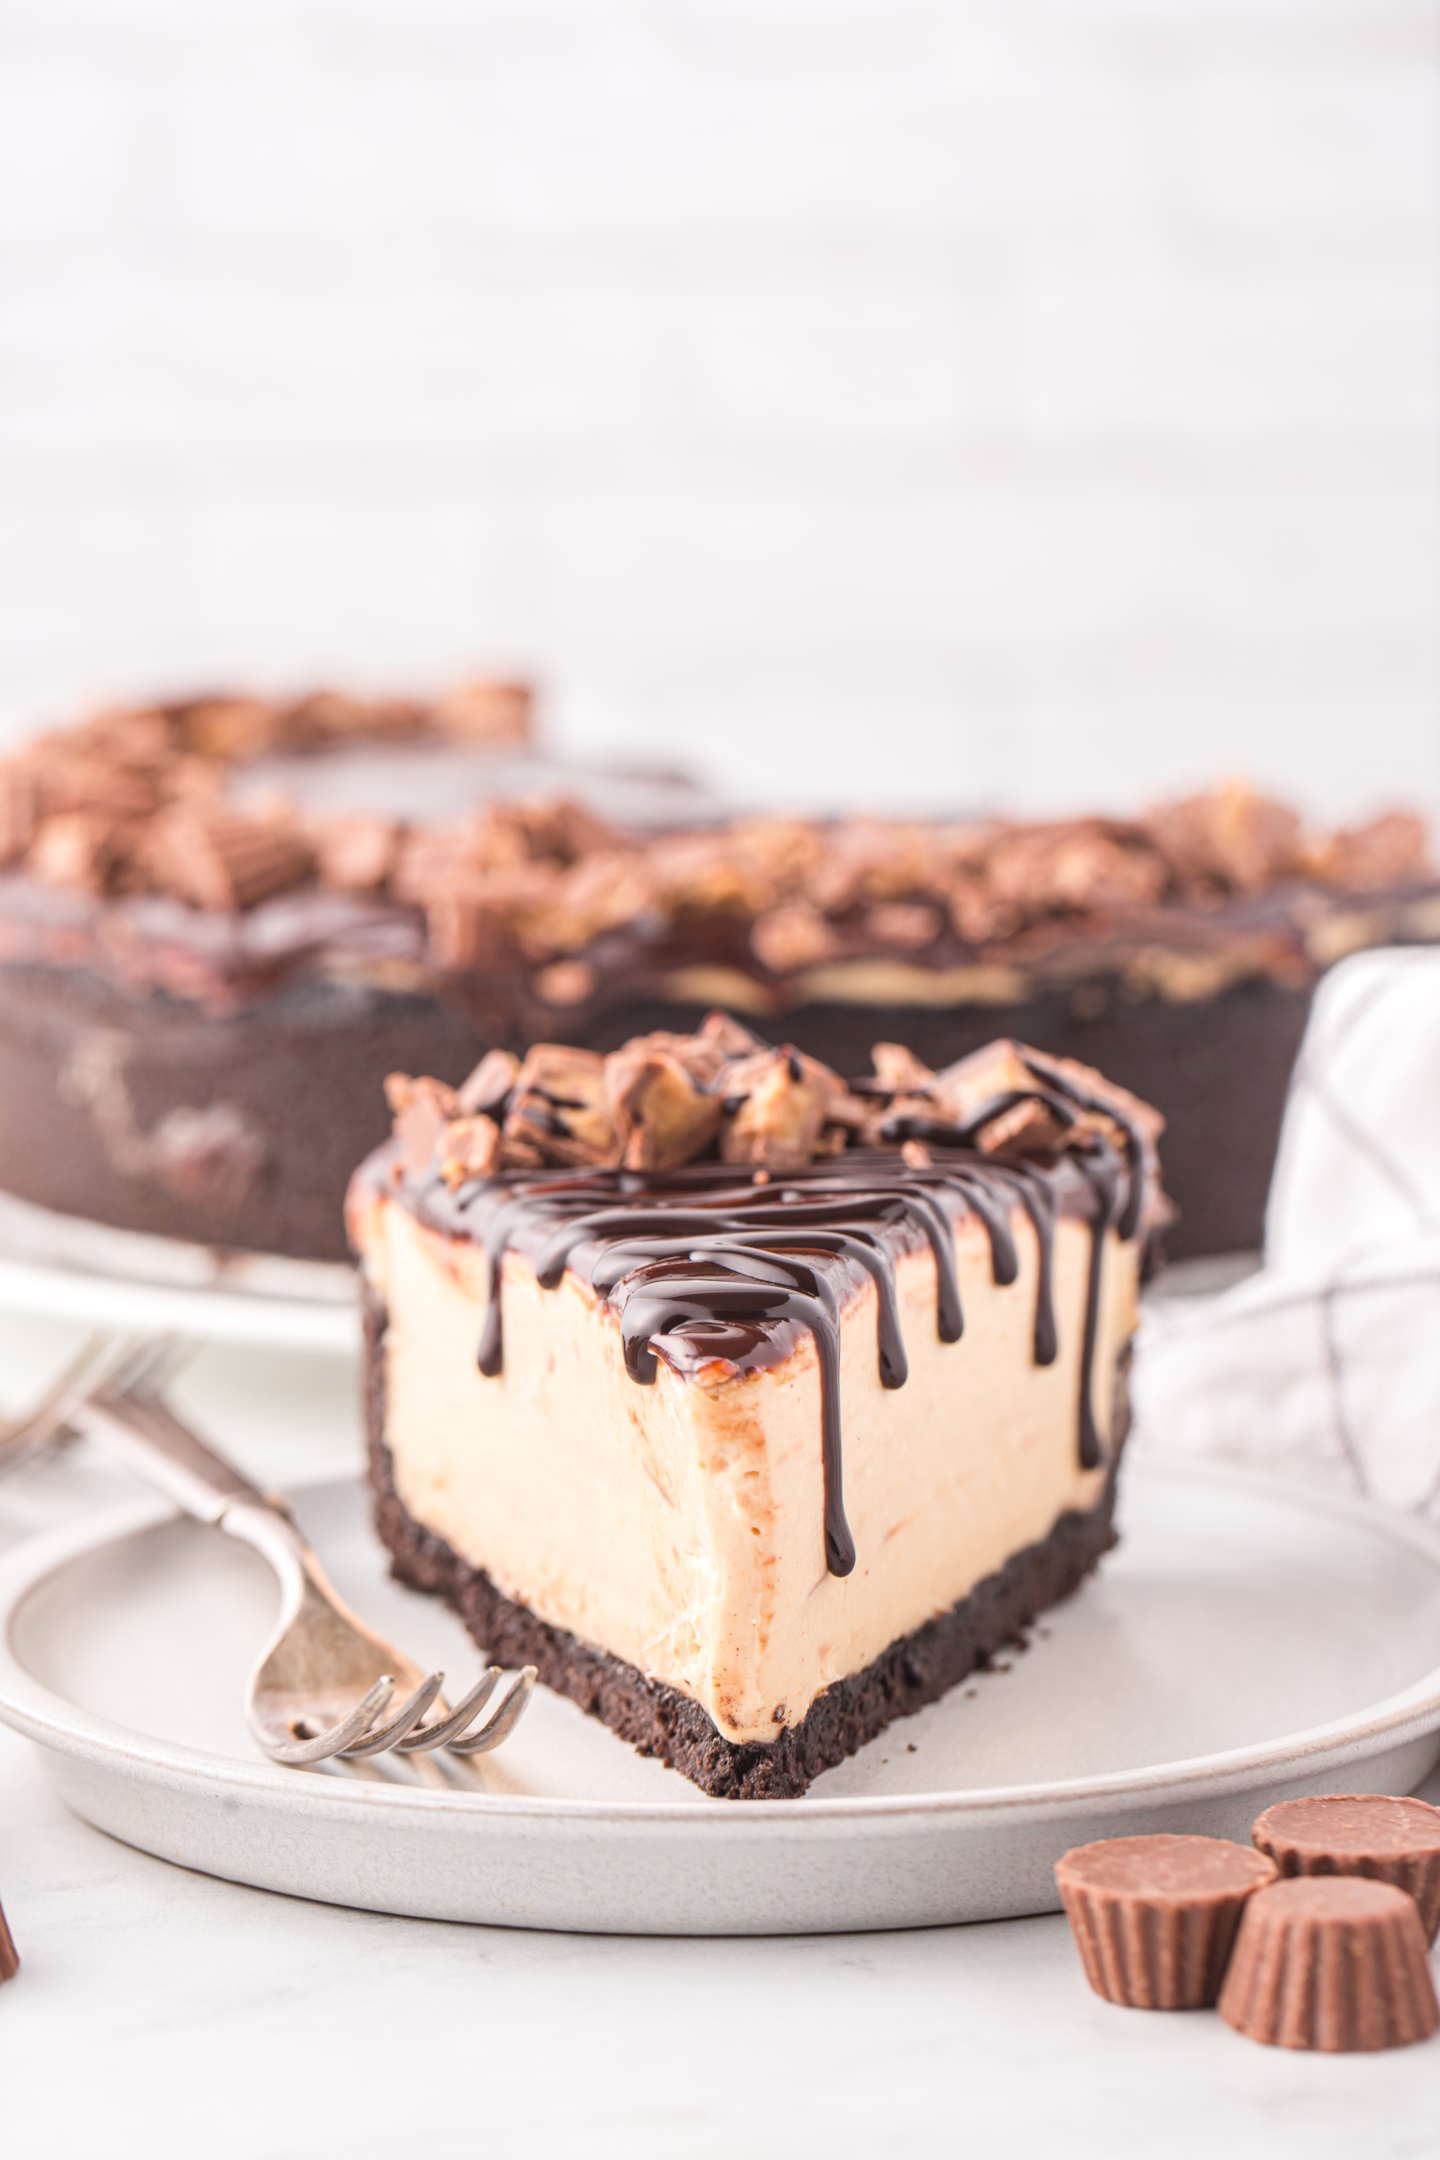 slice of no bake peanut butter cheesecake on a plate